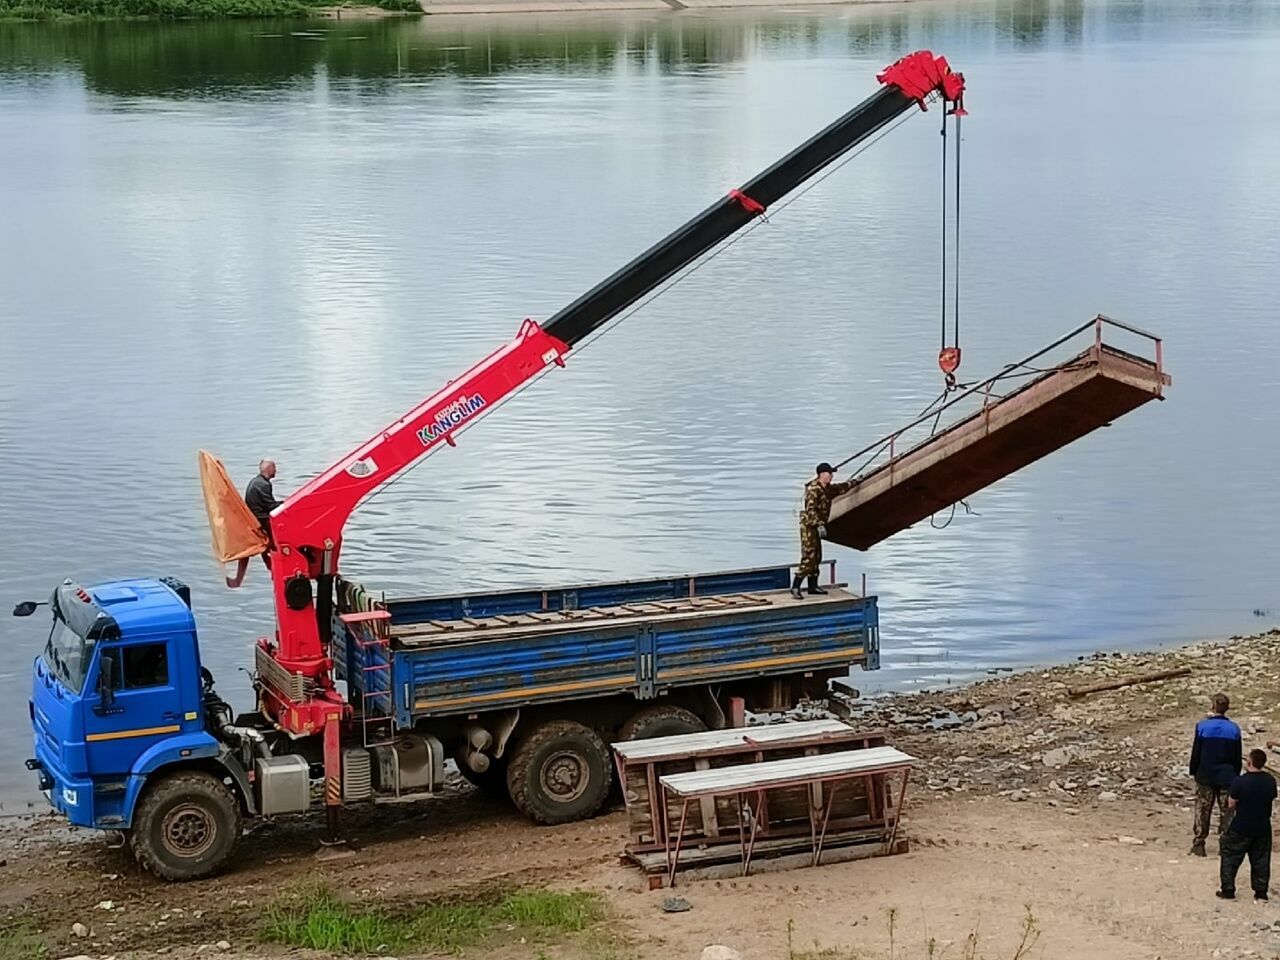 In Veliky Ustyug, the authorities installed platforms for washing clothes in the river